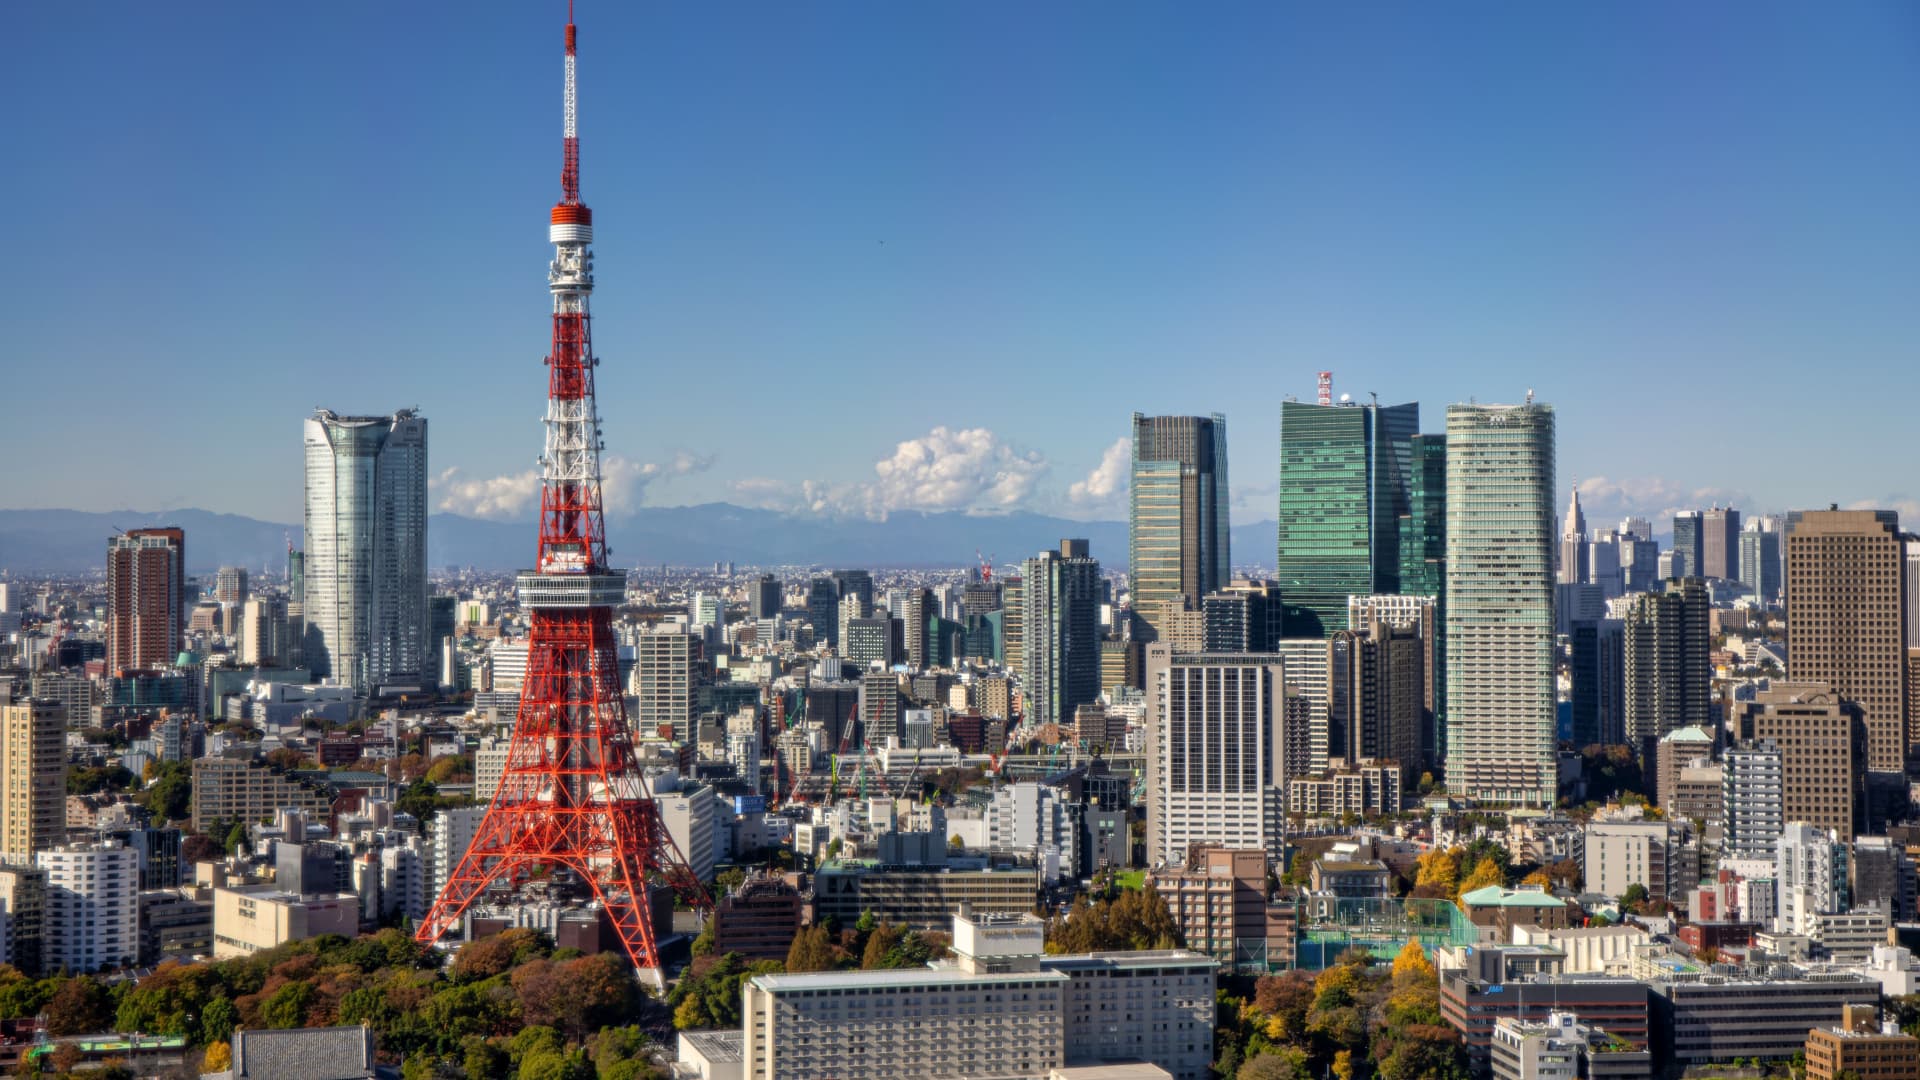 Japan ,Tokyo City skyline, Tokyo Tower. (Photo by: Dukas/Universal Images Group via Getty Images)